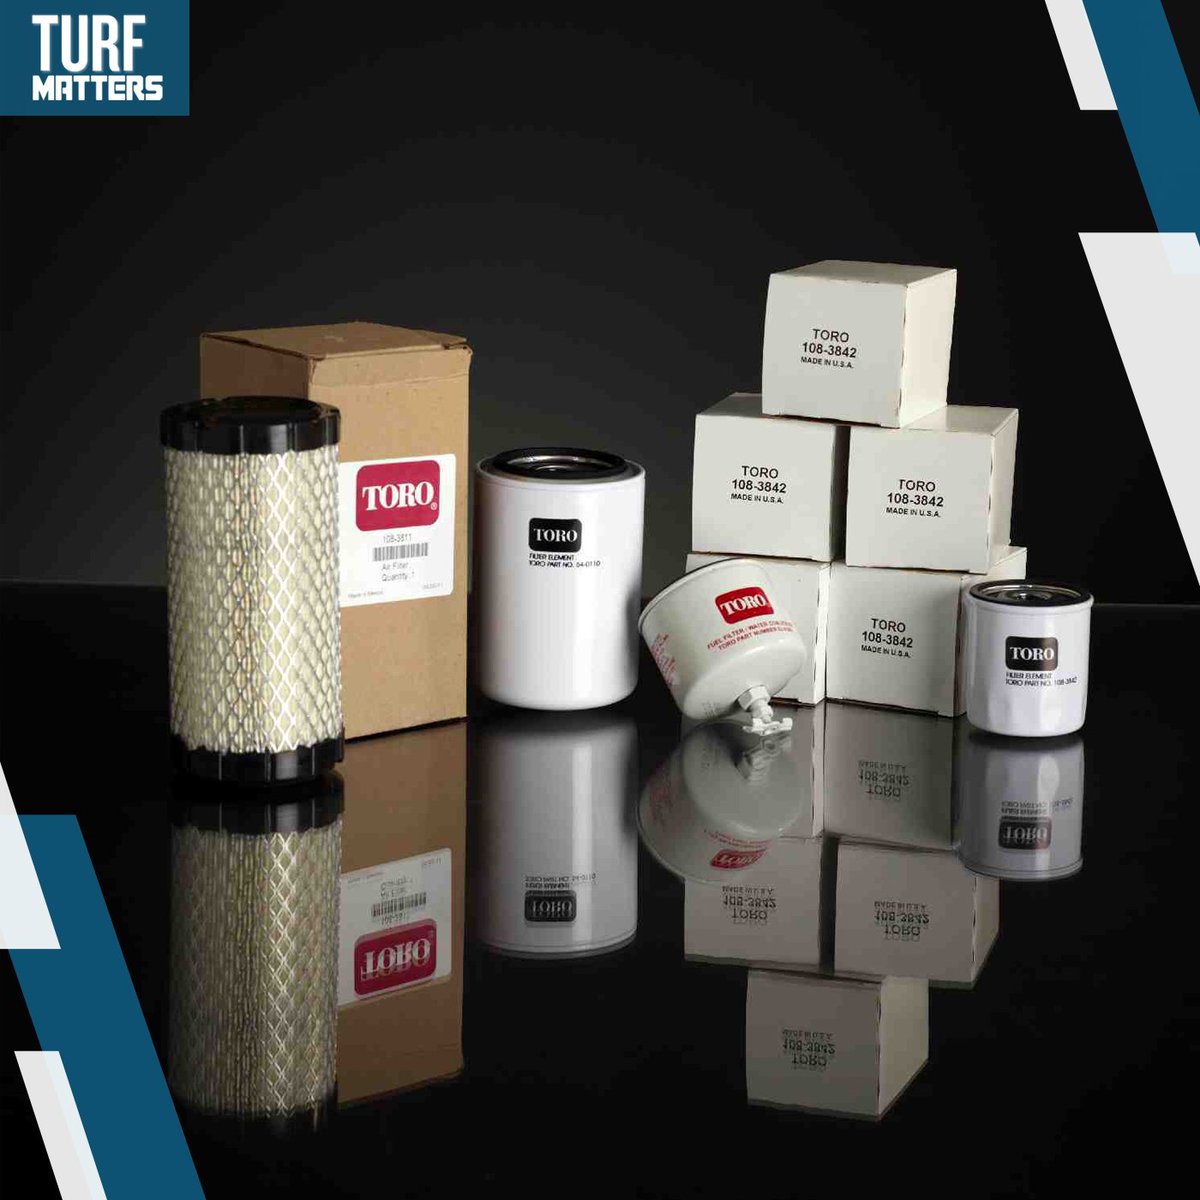 #TurfNews @ReesinkTurfcare is once again supporting customers with discounts on genuine Toro parts. This time it’s the multi-purpose, multi-value MVP kits which are benefitting from 10 percent off in May. Read more 👉 turfmatters.co.uk/reesink-offeri…